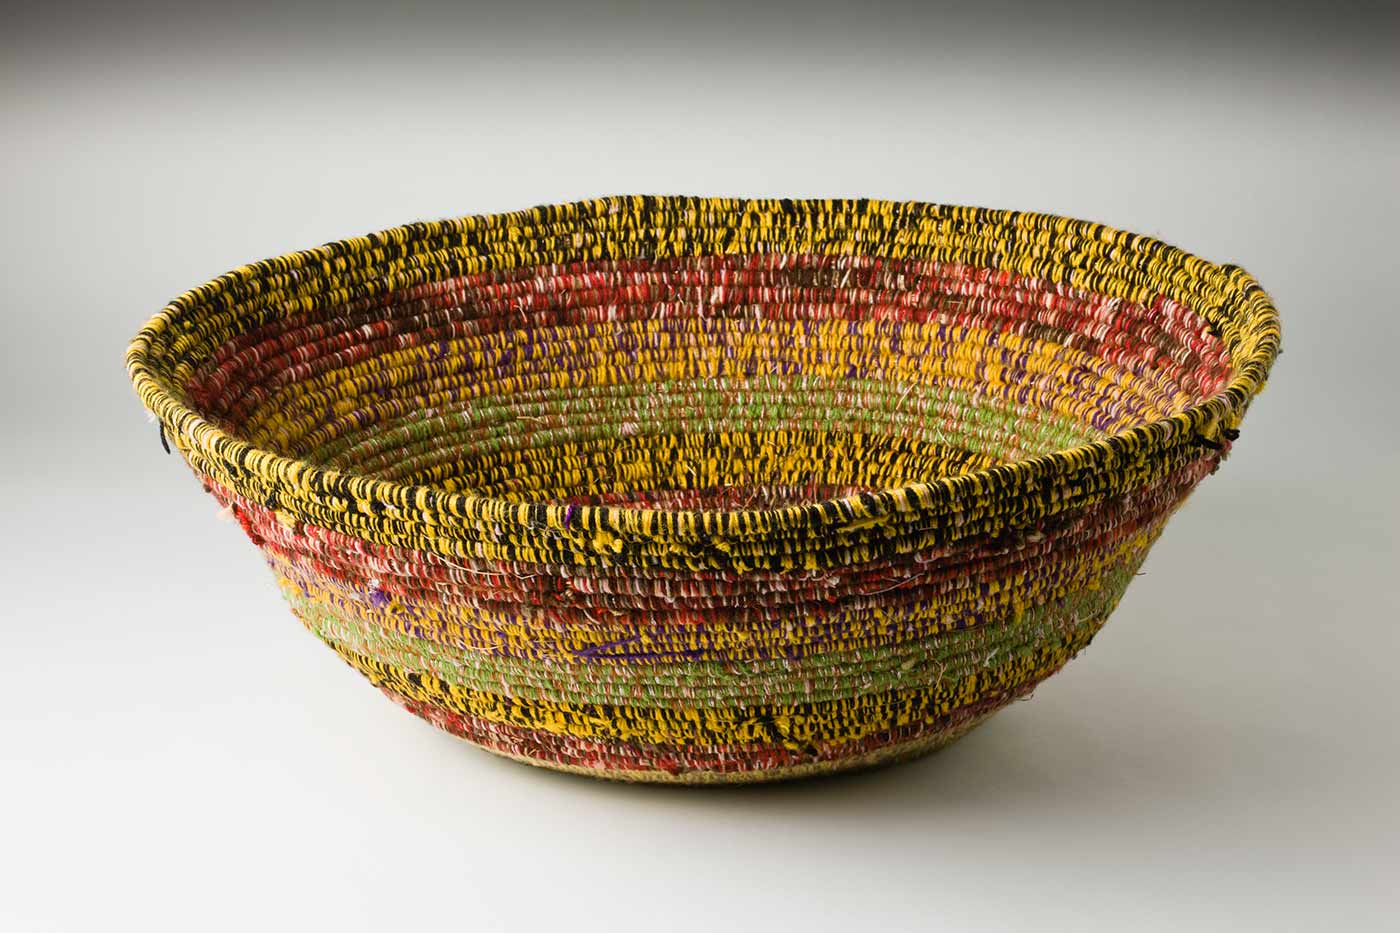 An oval coiled multicoloured yarn and plant fibre basket. The plant fibre in the centre of the basket is covered by purple-yellow yarn, followed by horizontal alternate yarn coverings over the fibre. The yarn colours are green-yellow, tan-yellow, purple-red, yellow-black, green-silver-brown and red-white-brown. The top plant fibre is covered by yellow-black yarn. - click to view larger image